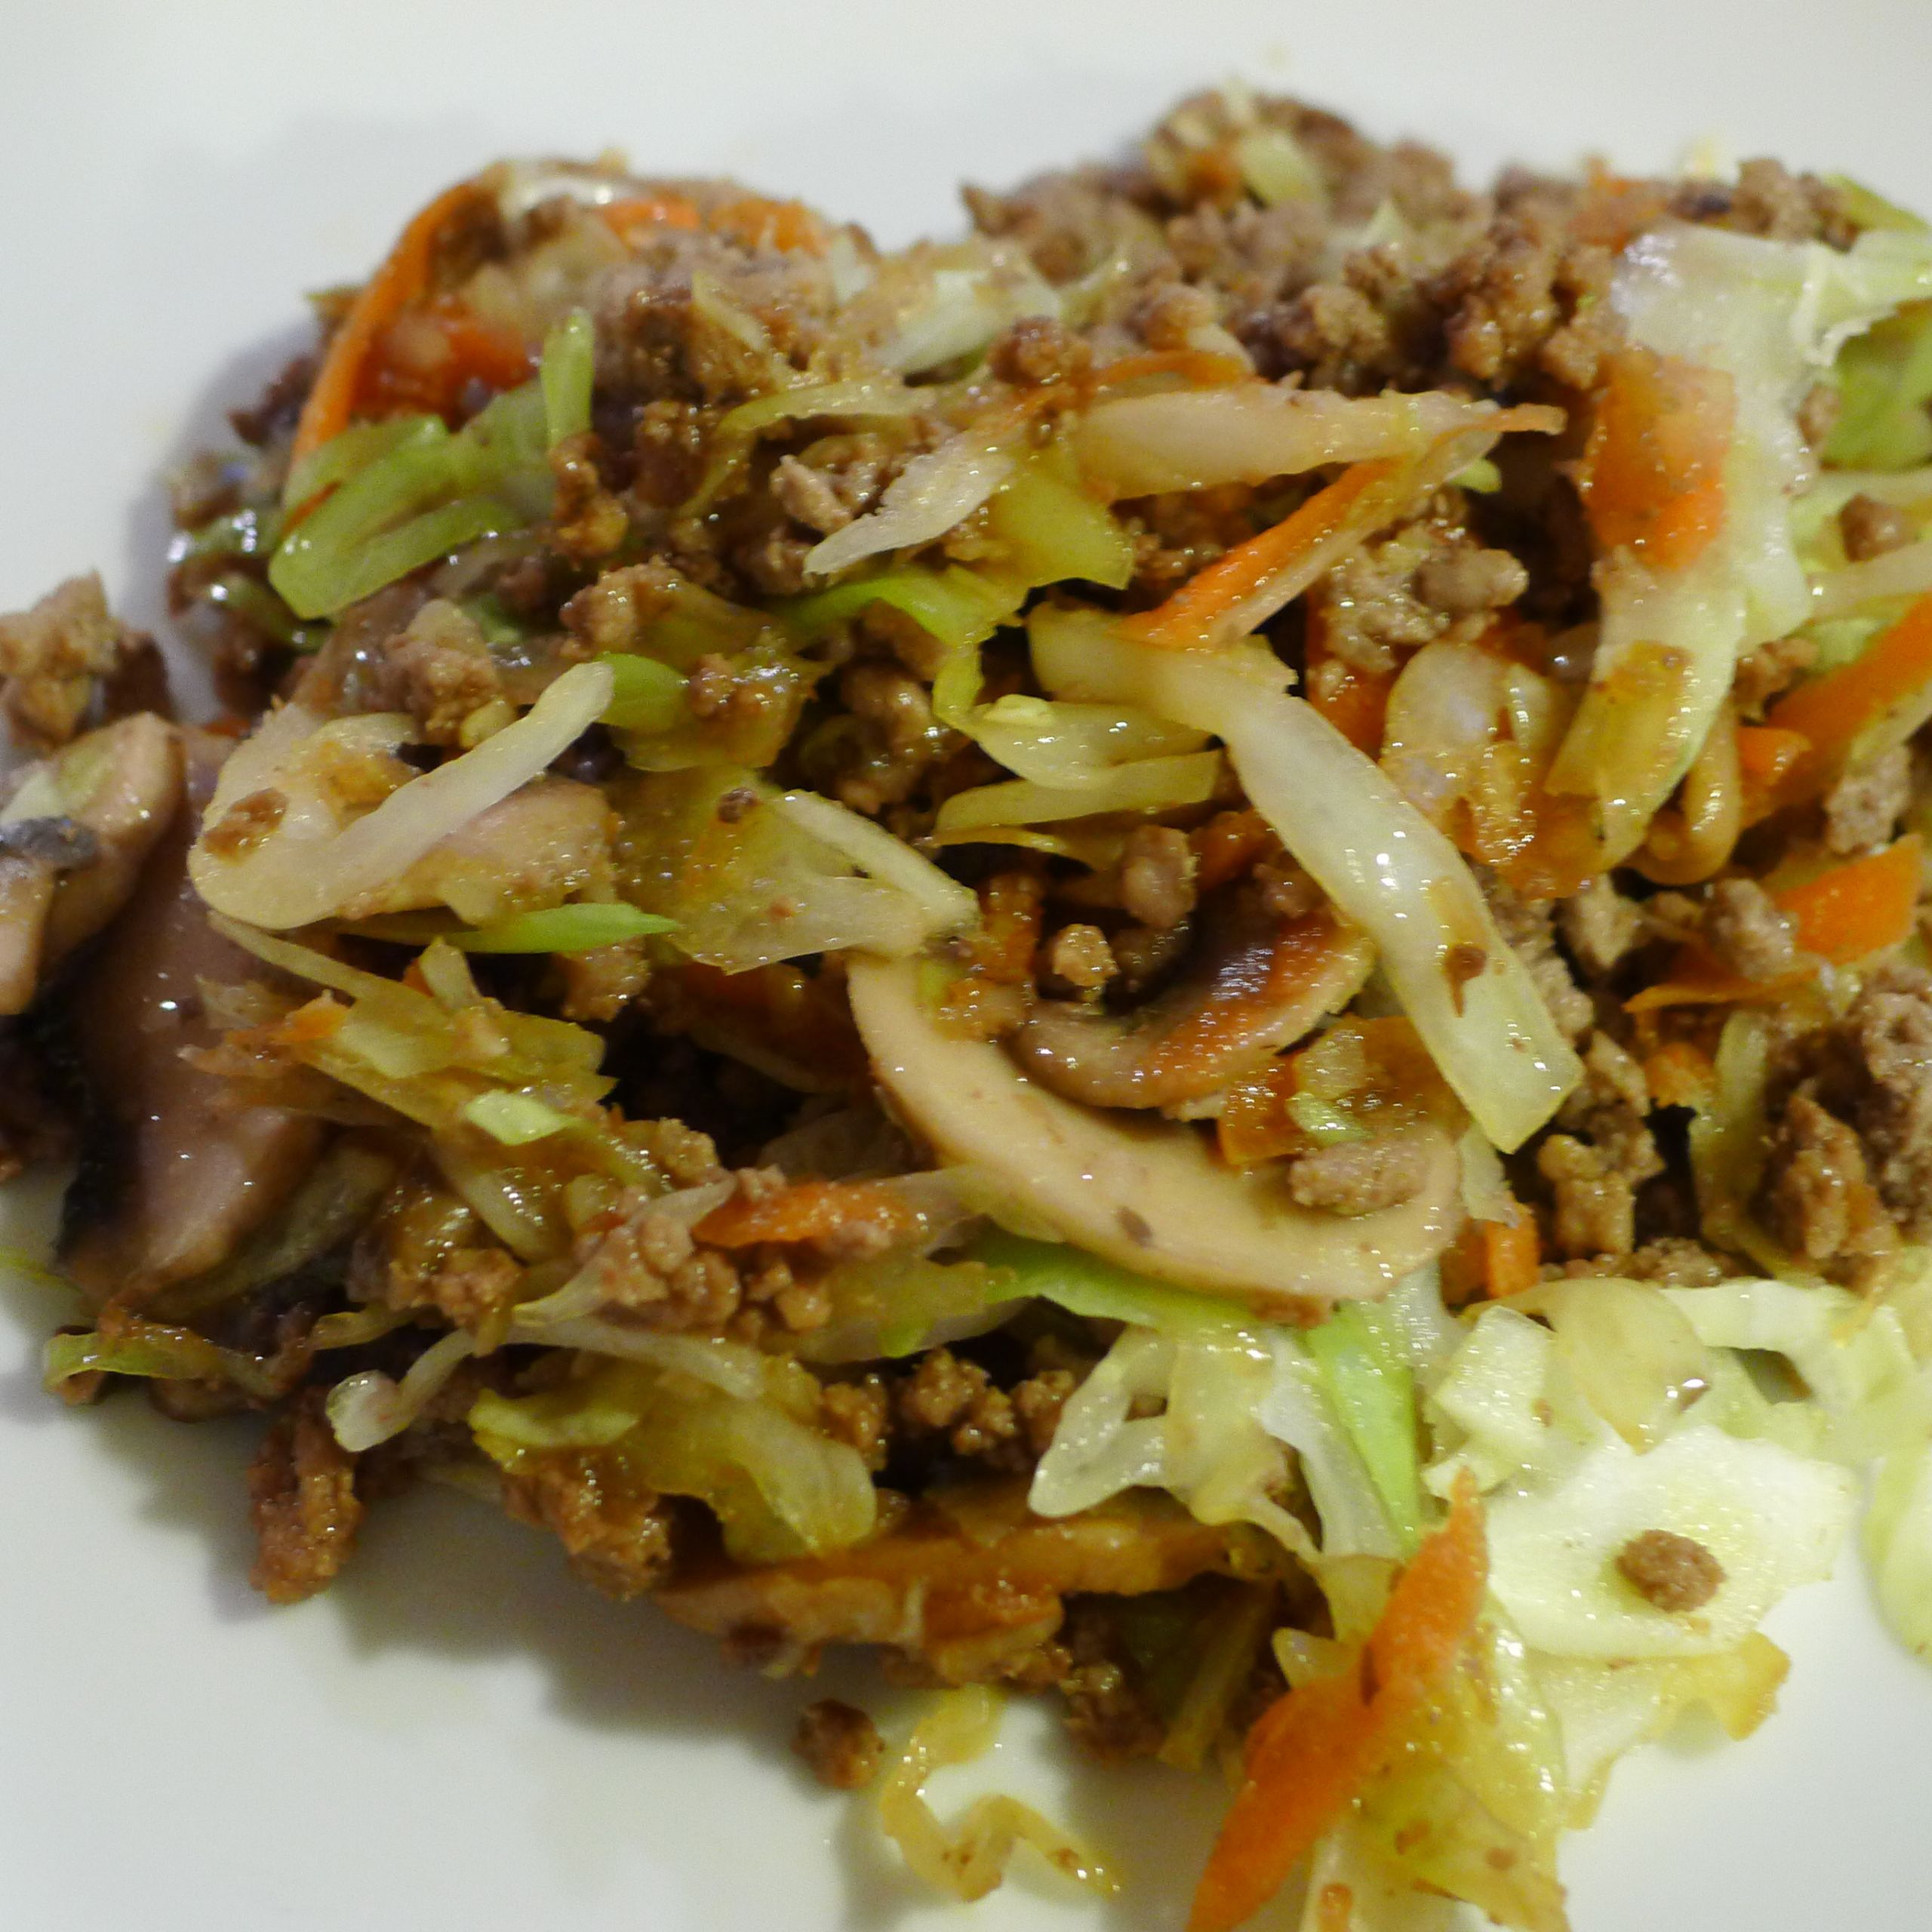 Recipes That Use Ground Beef
 Asian Ground Beef Stir Fry gluten free dairy free egg